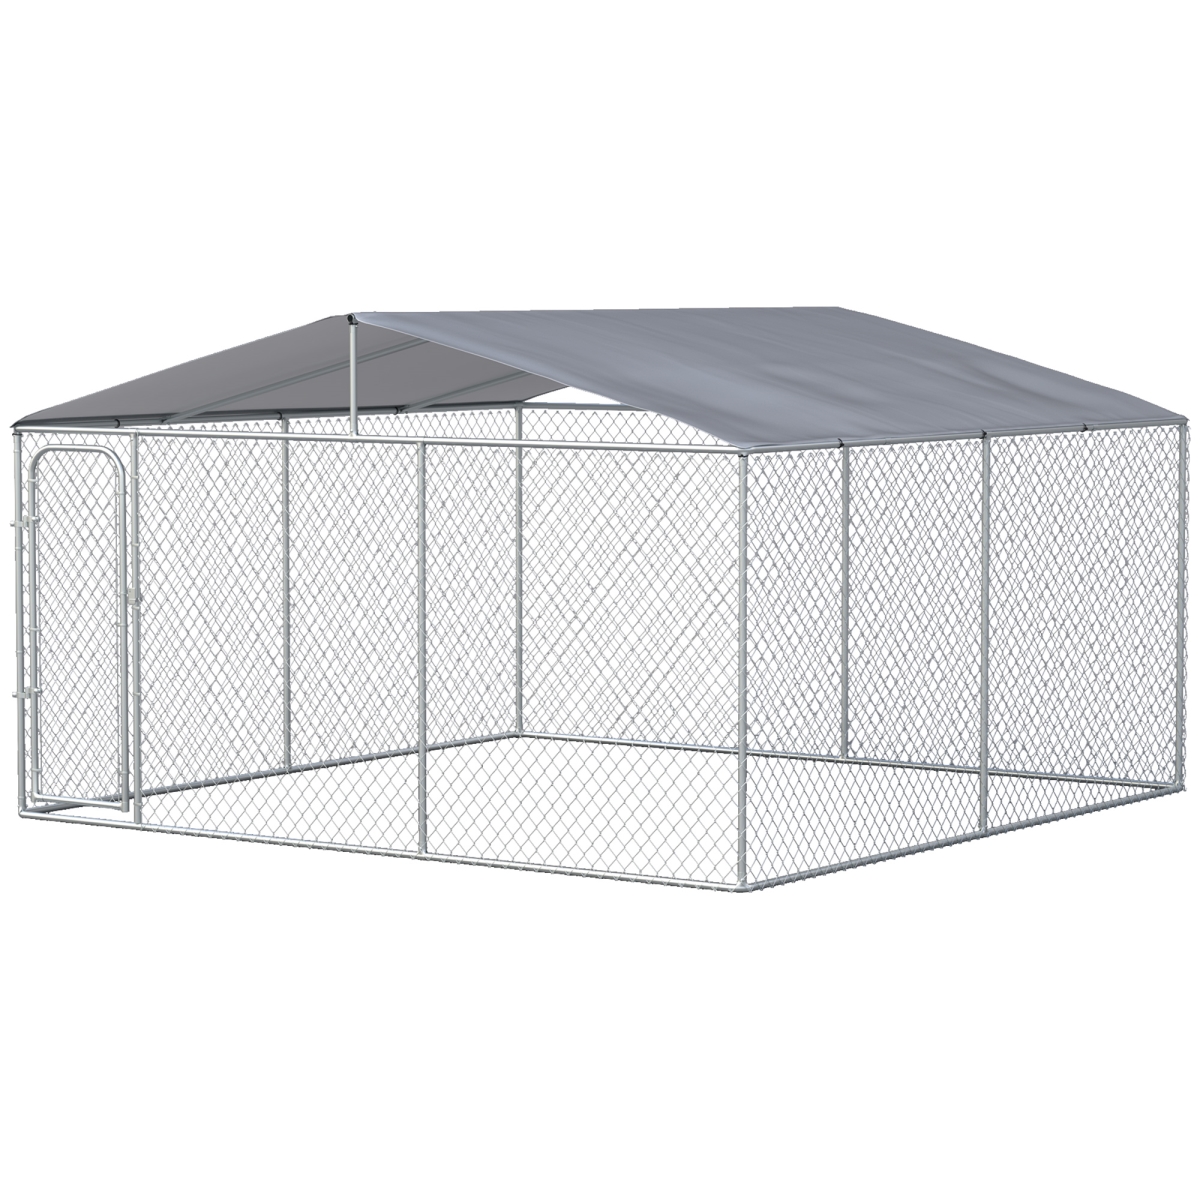 Picture of 212 Main D02-049V04SR 13 x 13 x 7.5 ft. PawHut Outdoor Dog Kennel Galvanized Steel Fence with Cover Secure Lock Mesh Sidewalls for Backyard